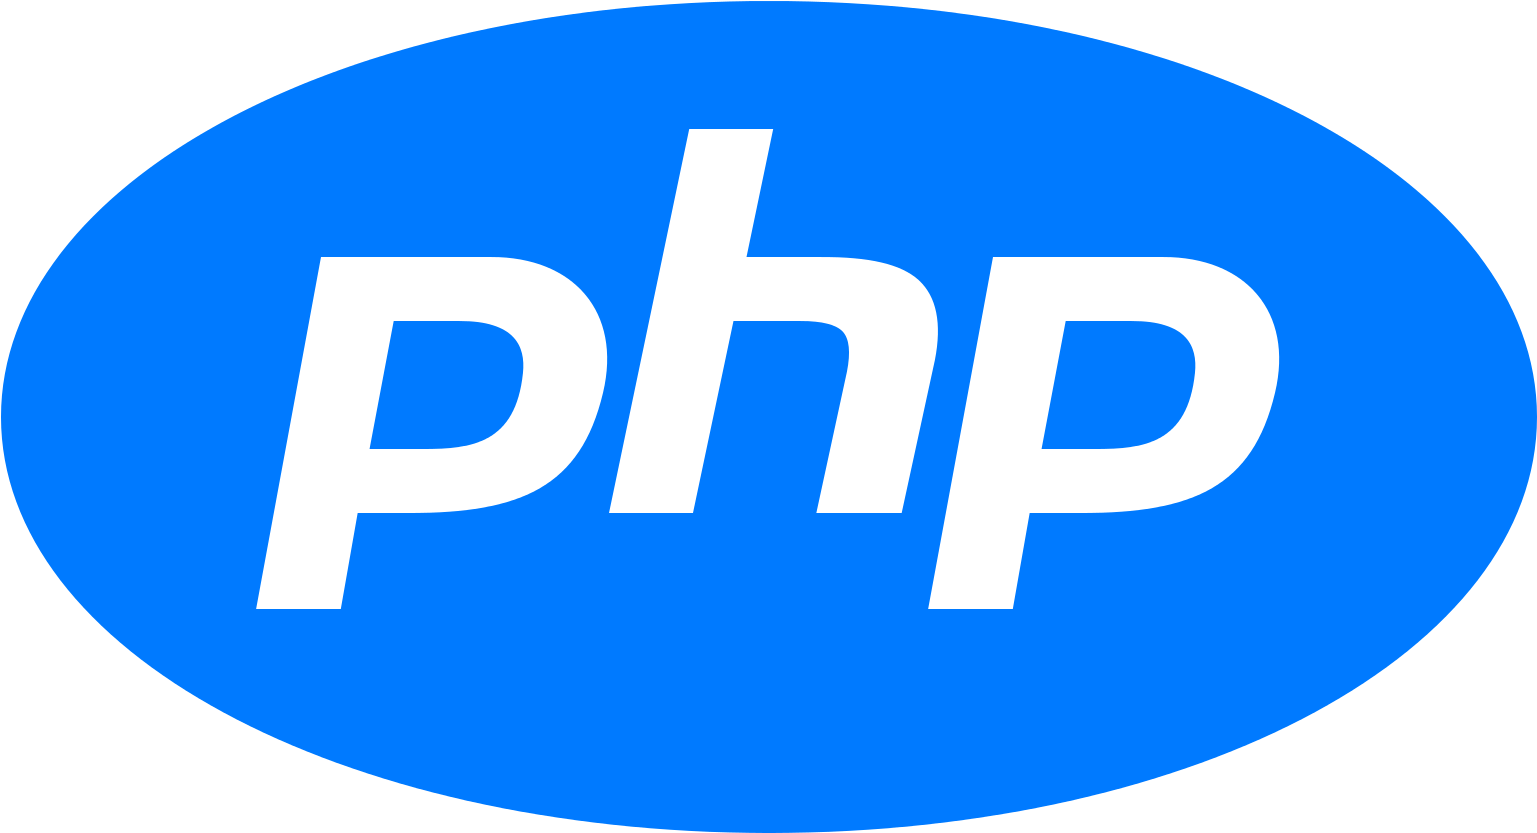 PHP Course Contents